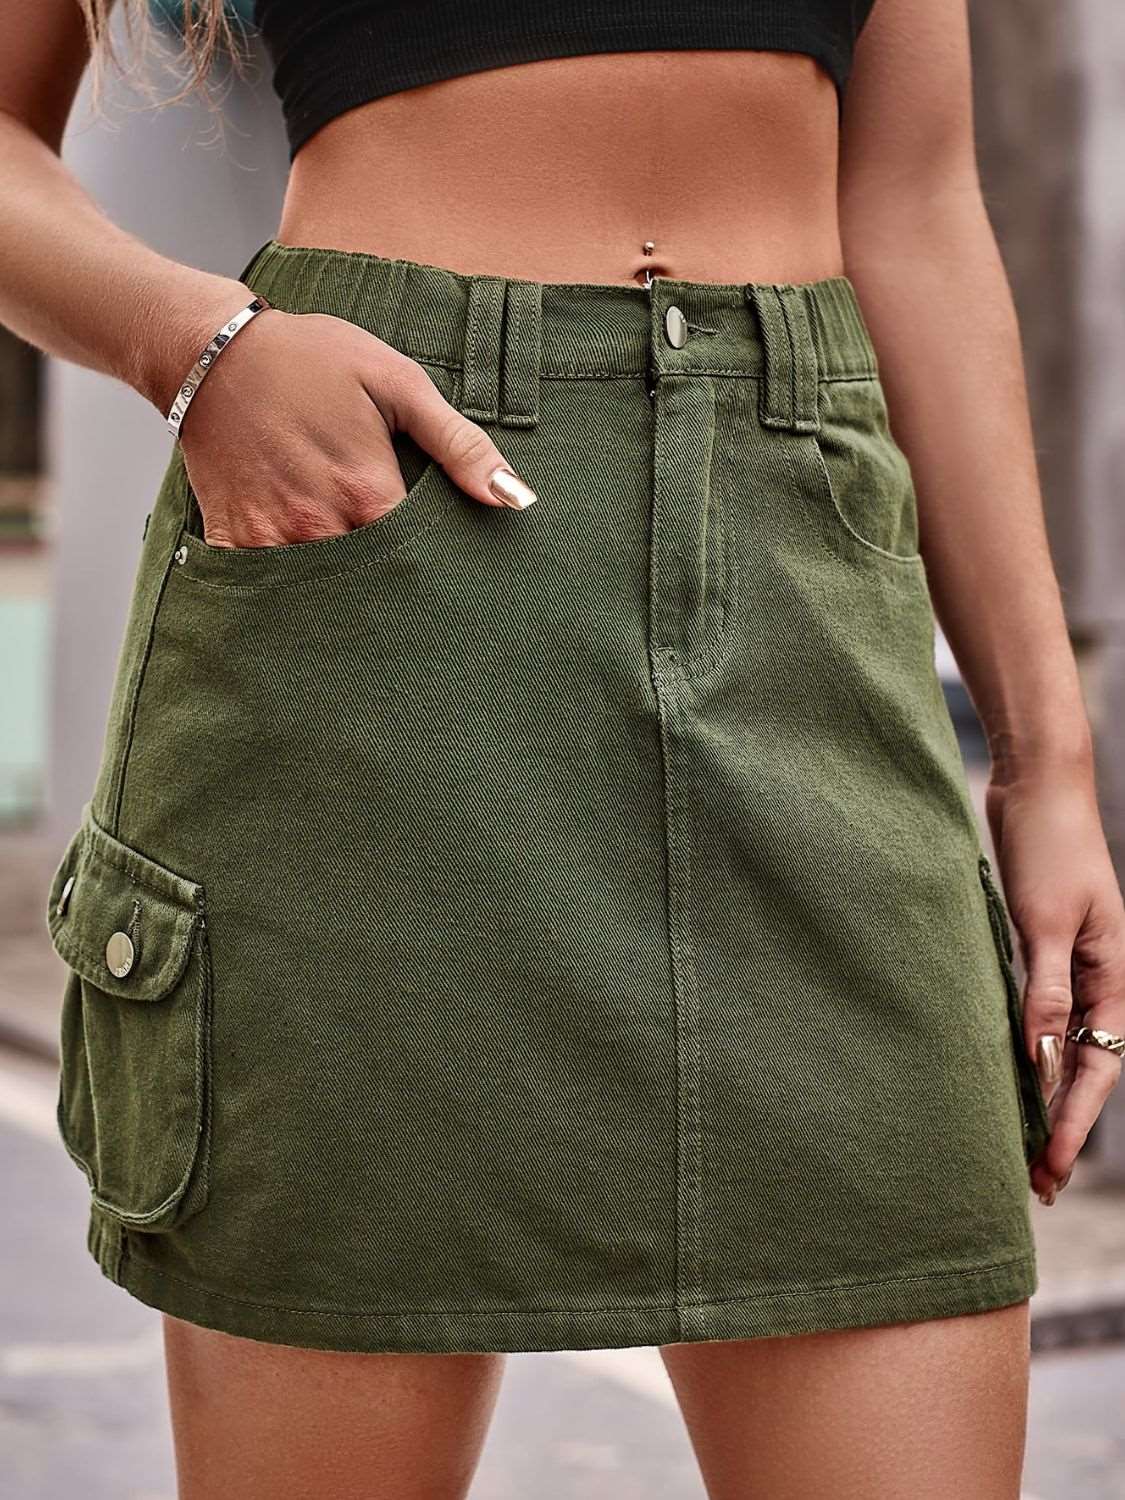 Denim Mini Skirt with Pockets (3 Colors)  Krazy Heart Designs Boutique Army Green S 